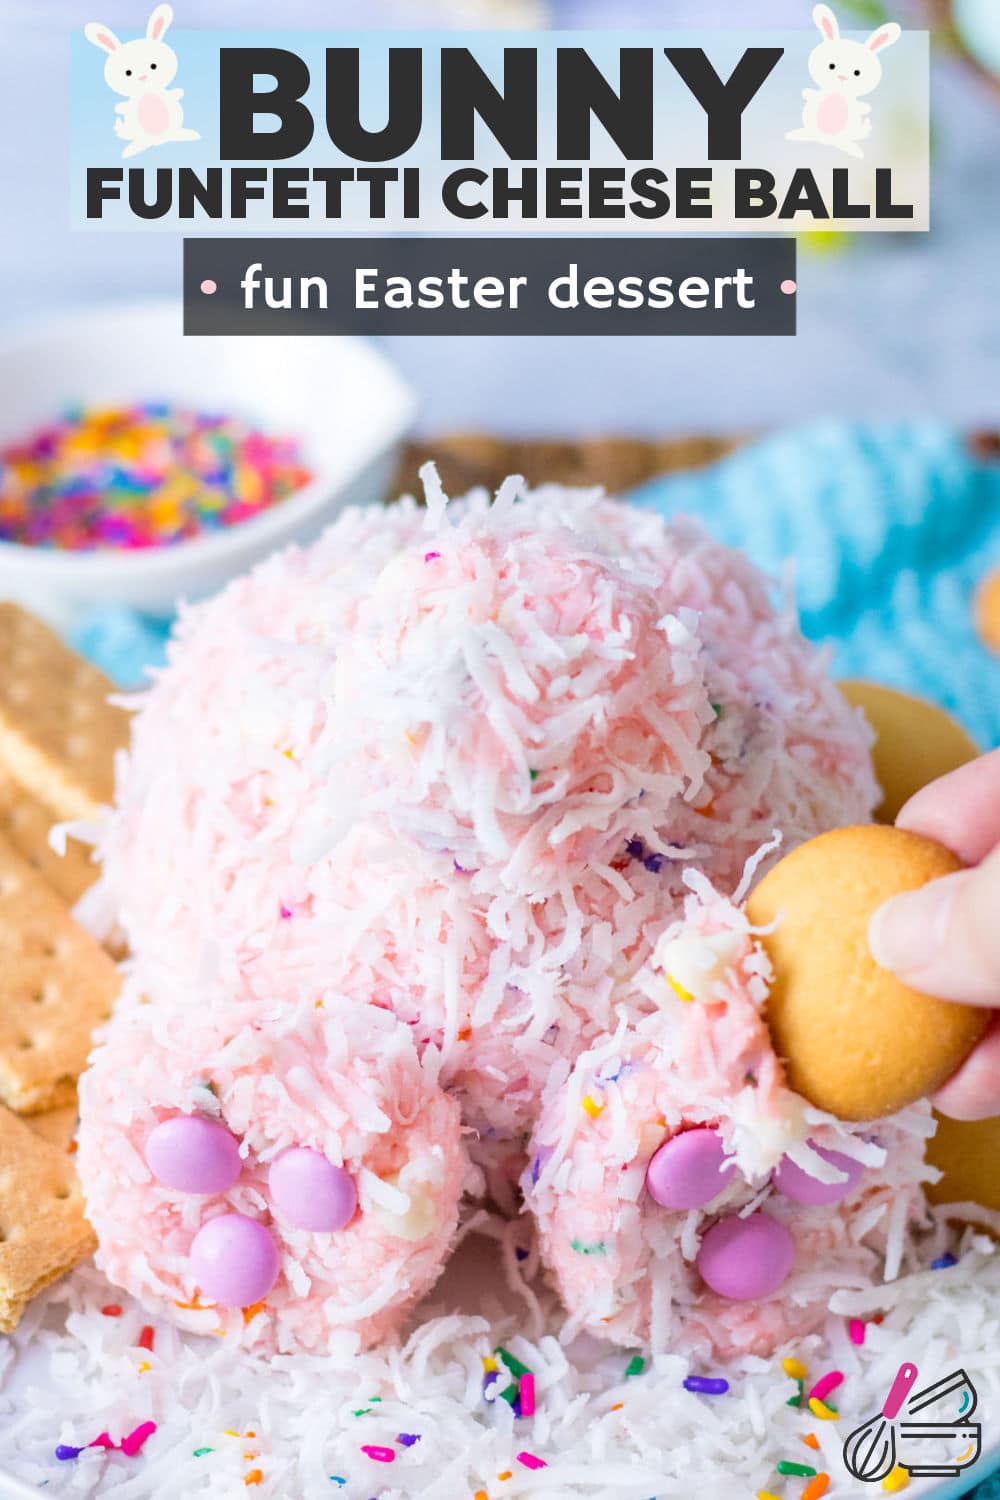 This adorable Bunny Butt Strawberry Funfetti Dip is made with cream cheese and strawberry cake mix which makes it perfect for dipping cookies.  A quick coat of shredded coconut gives this bunny his fur.  This Easter Bunny Dessert Cheese Ball is going to be the cutest dessert on your Easter table! | www.persnicketyplates.com